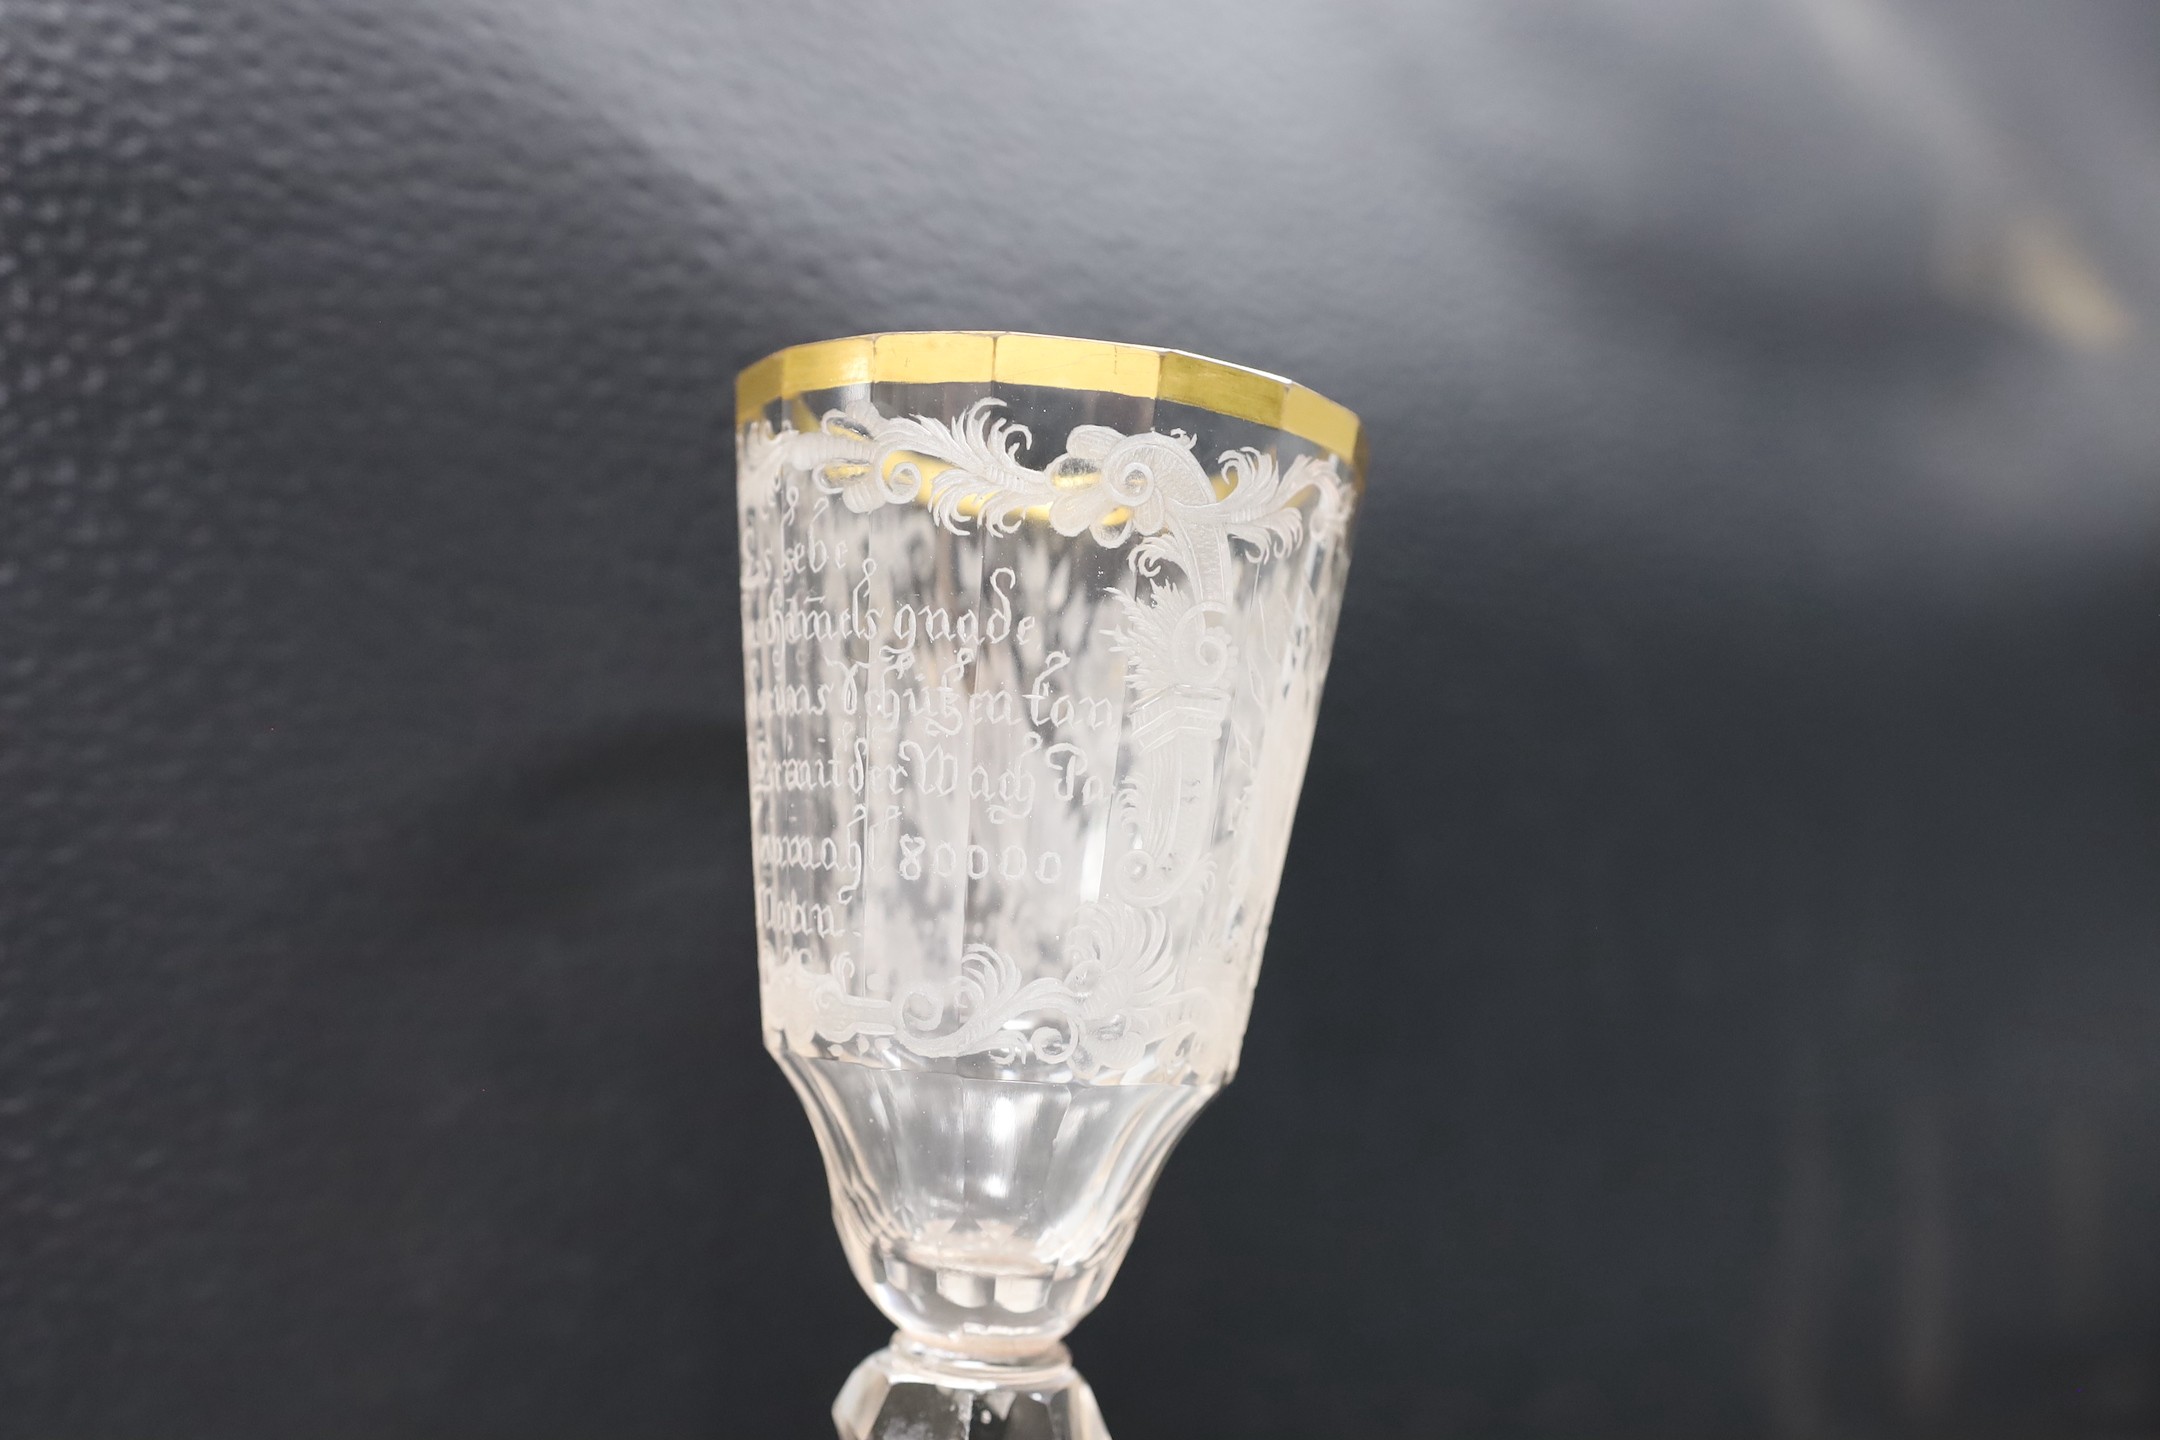 A mid 18th century German/Bohemian glass with military engraving, 17cms high